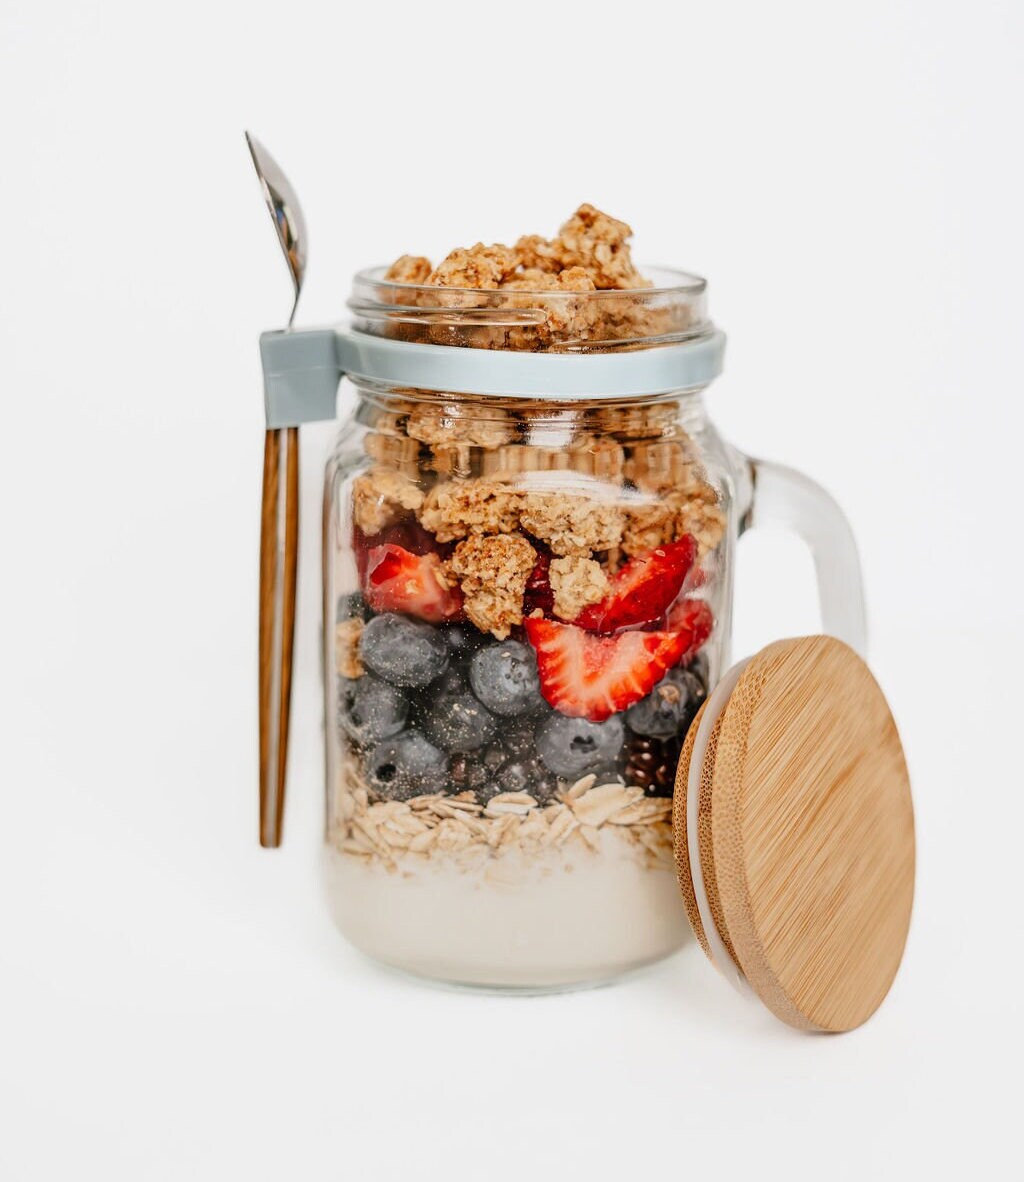 B&B Farmhouse Overnight Oats Containers with Lids Glass - 16 oz Mason Jars for Overnight Oats - Ideal Chia Seed Pudding Jars - Glass Jars with Lids